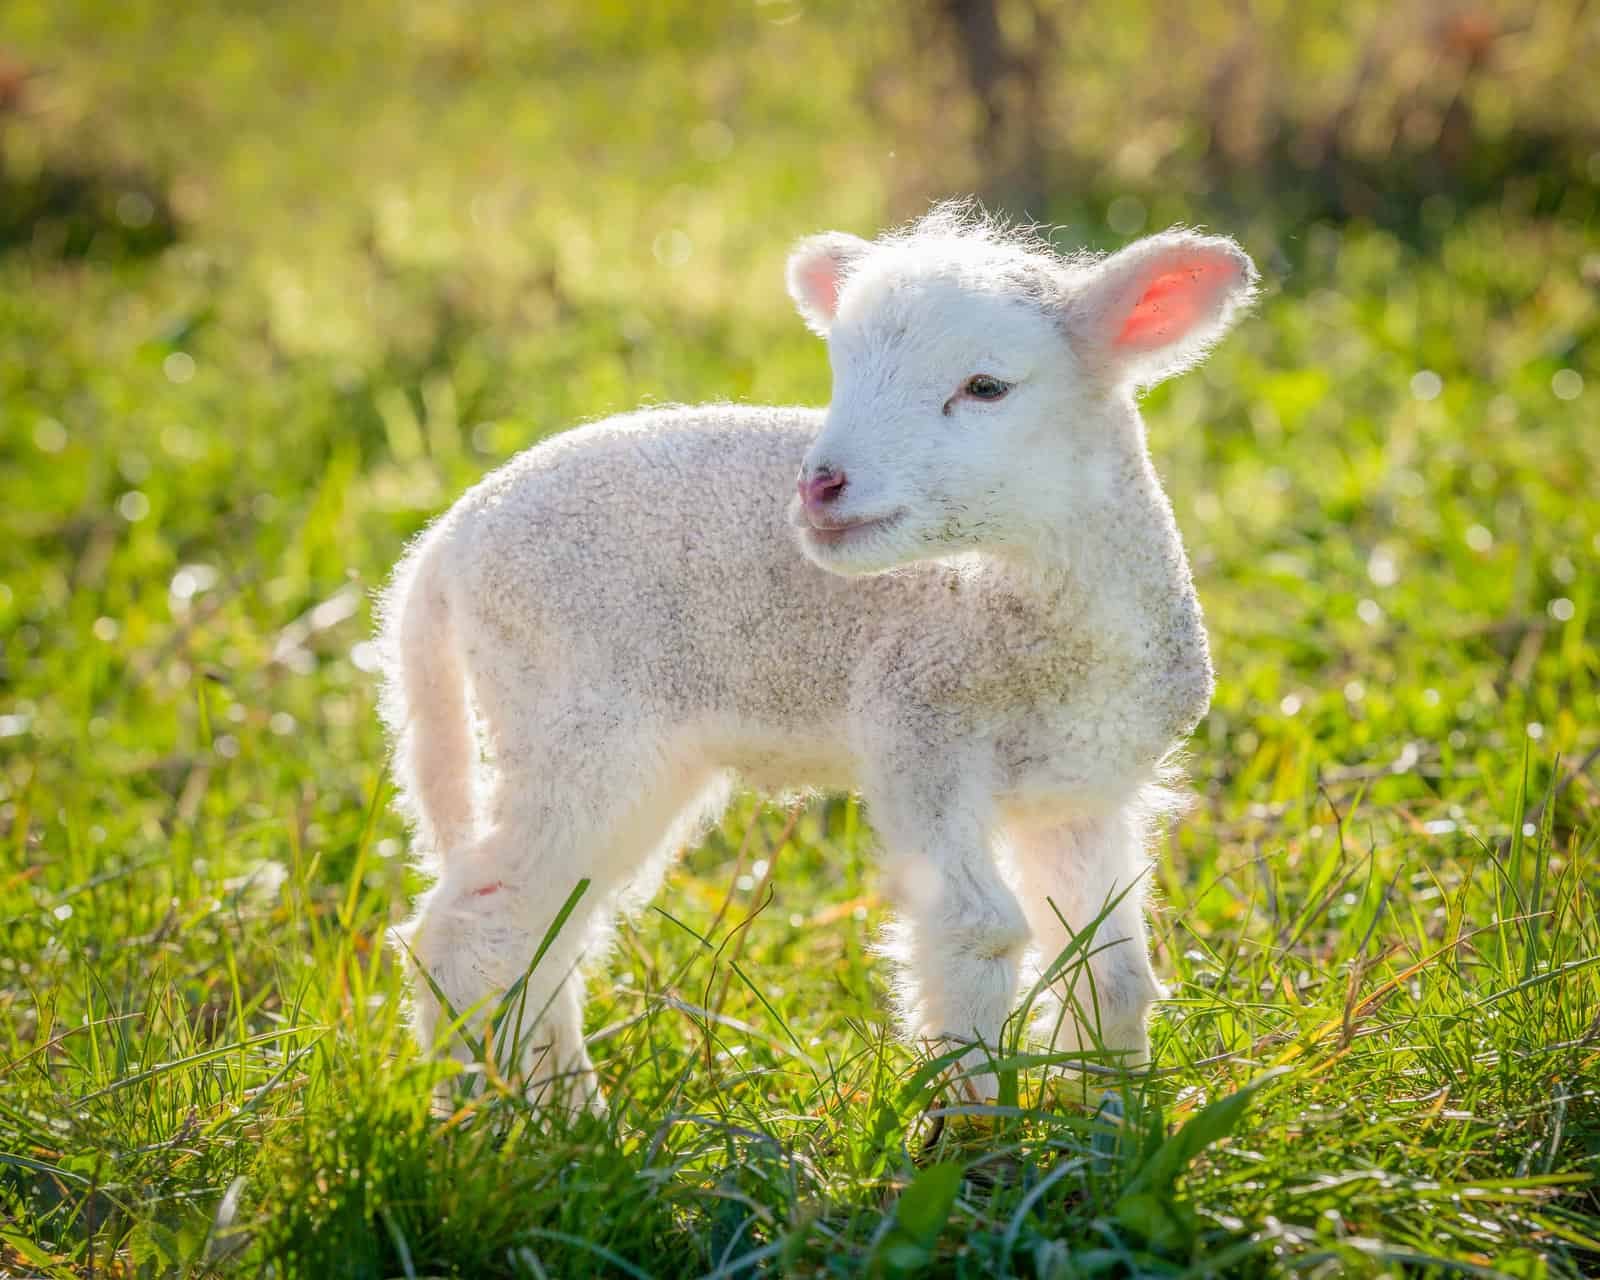 7 Fun Facts About Lambs To Melt Your Heart